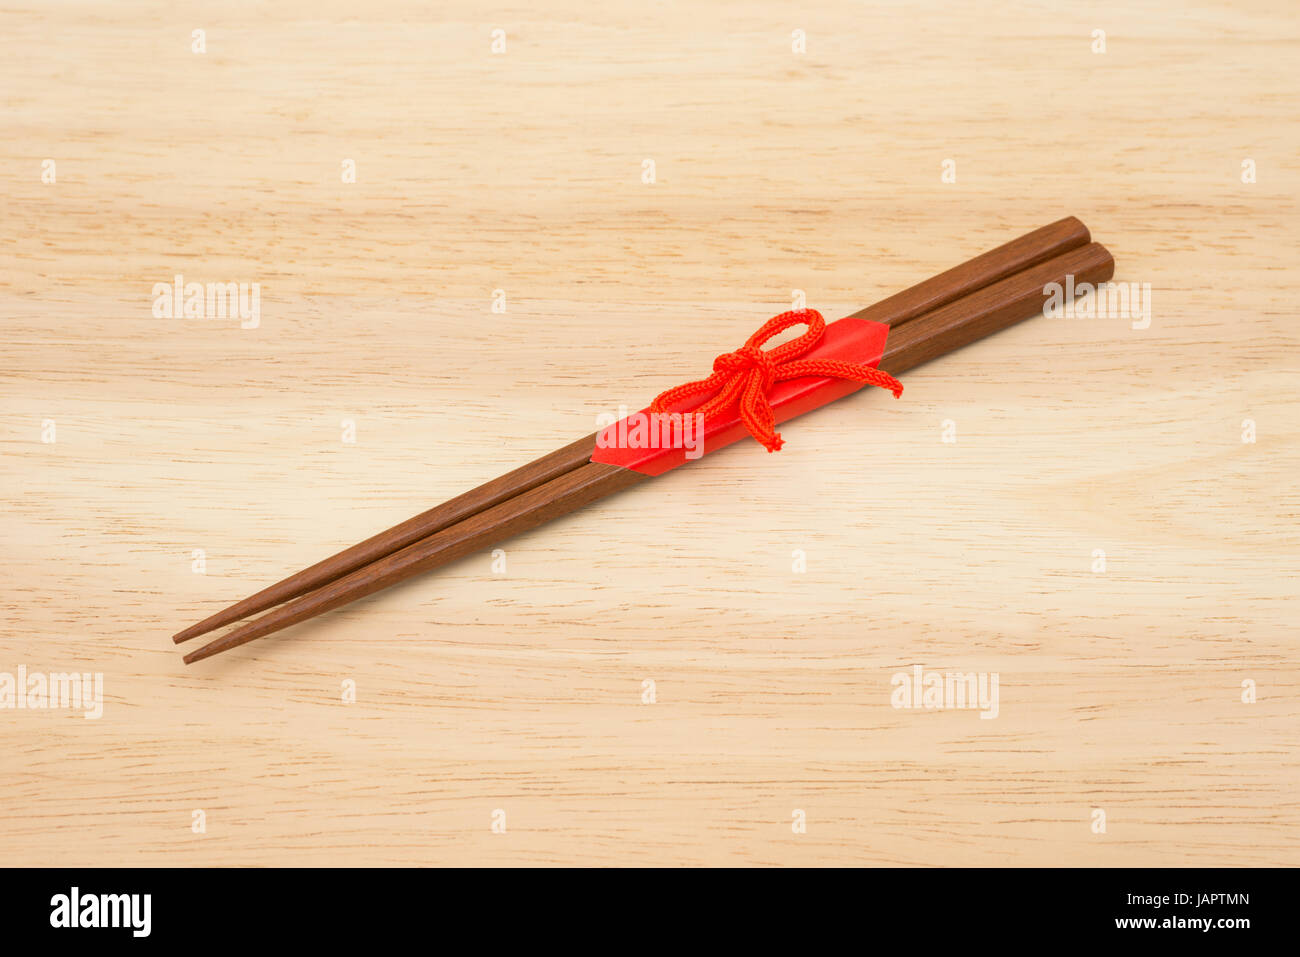 Japanese wooden chopsticks wrapped in red paper and red rope on white background. Stock Photo